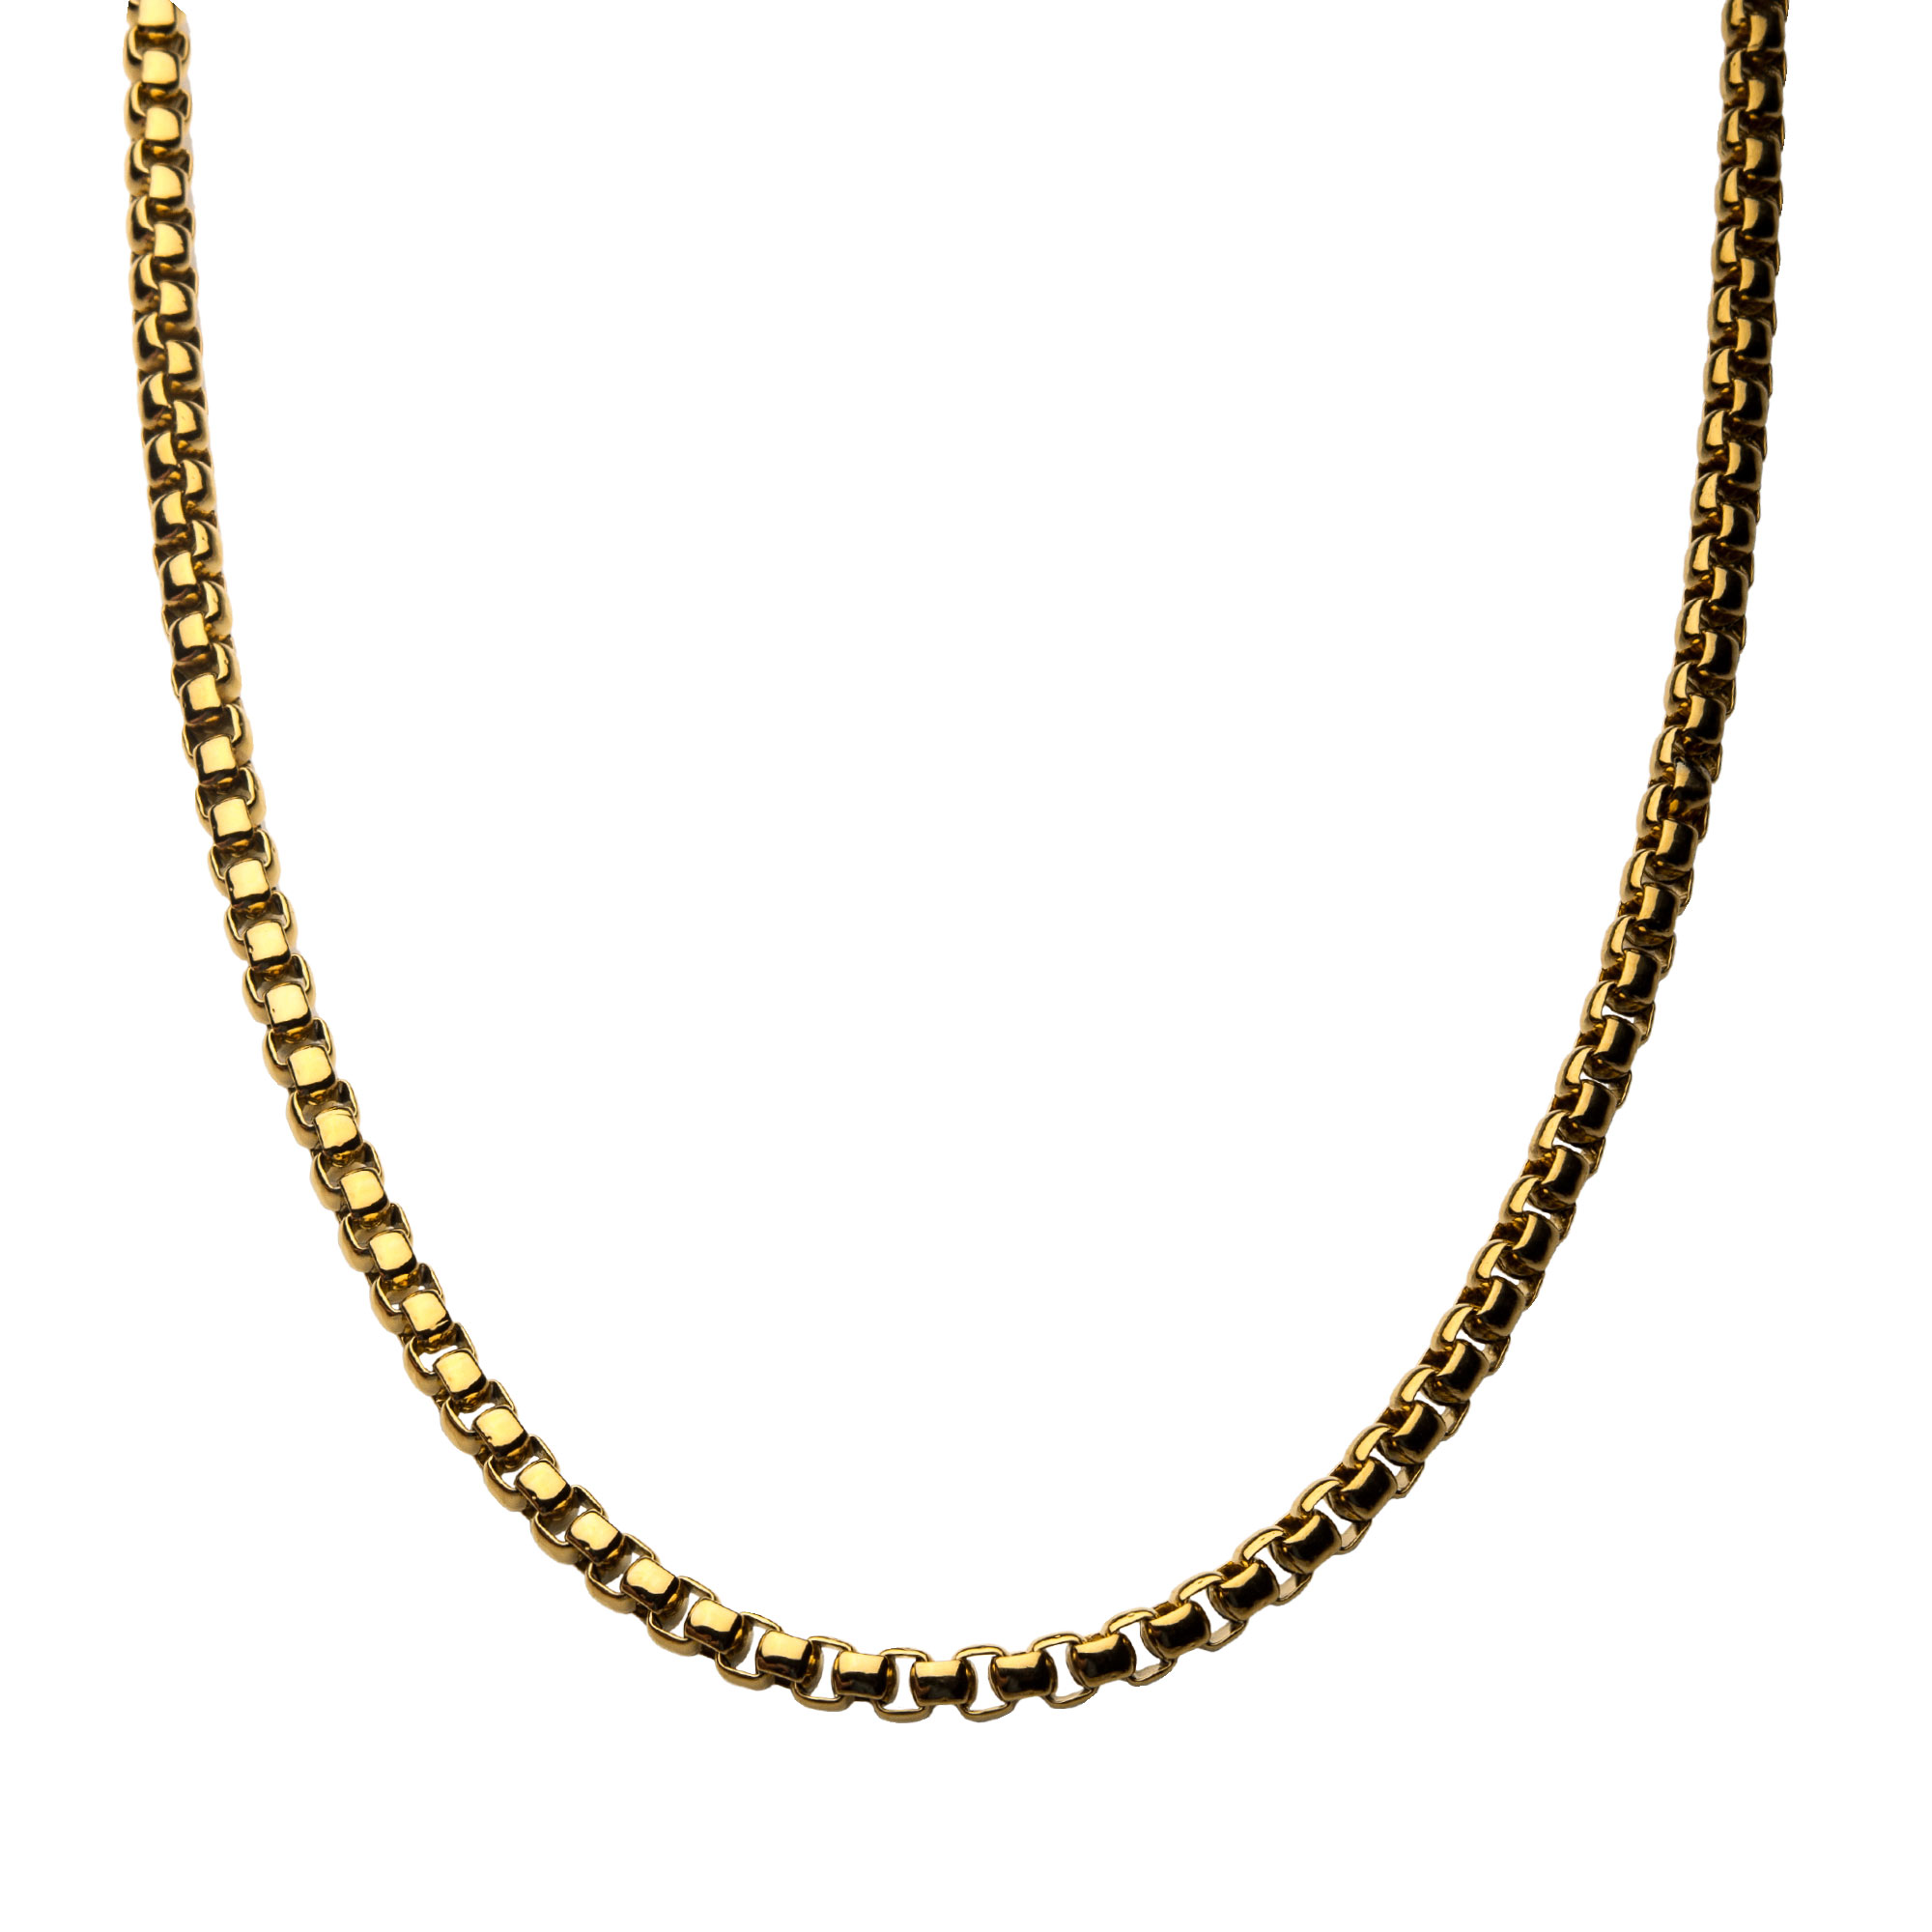 18K Gold Plated Bold Box Chain Necklace Image 2 P.K. Bennett Jewelers Mundelein, IL